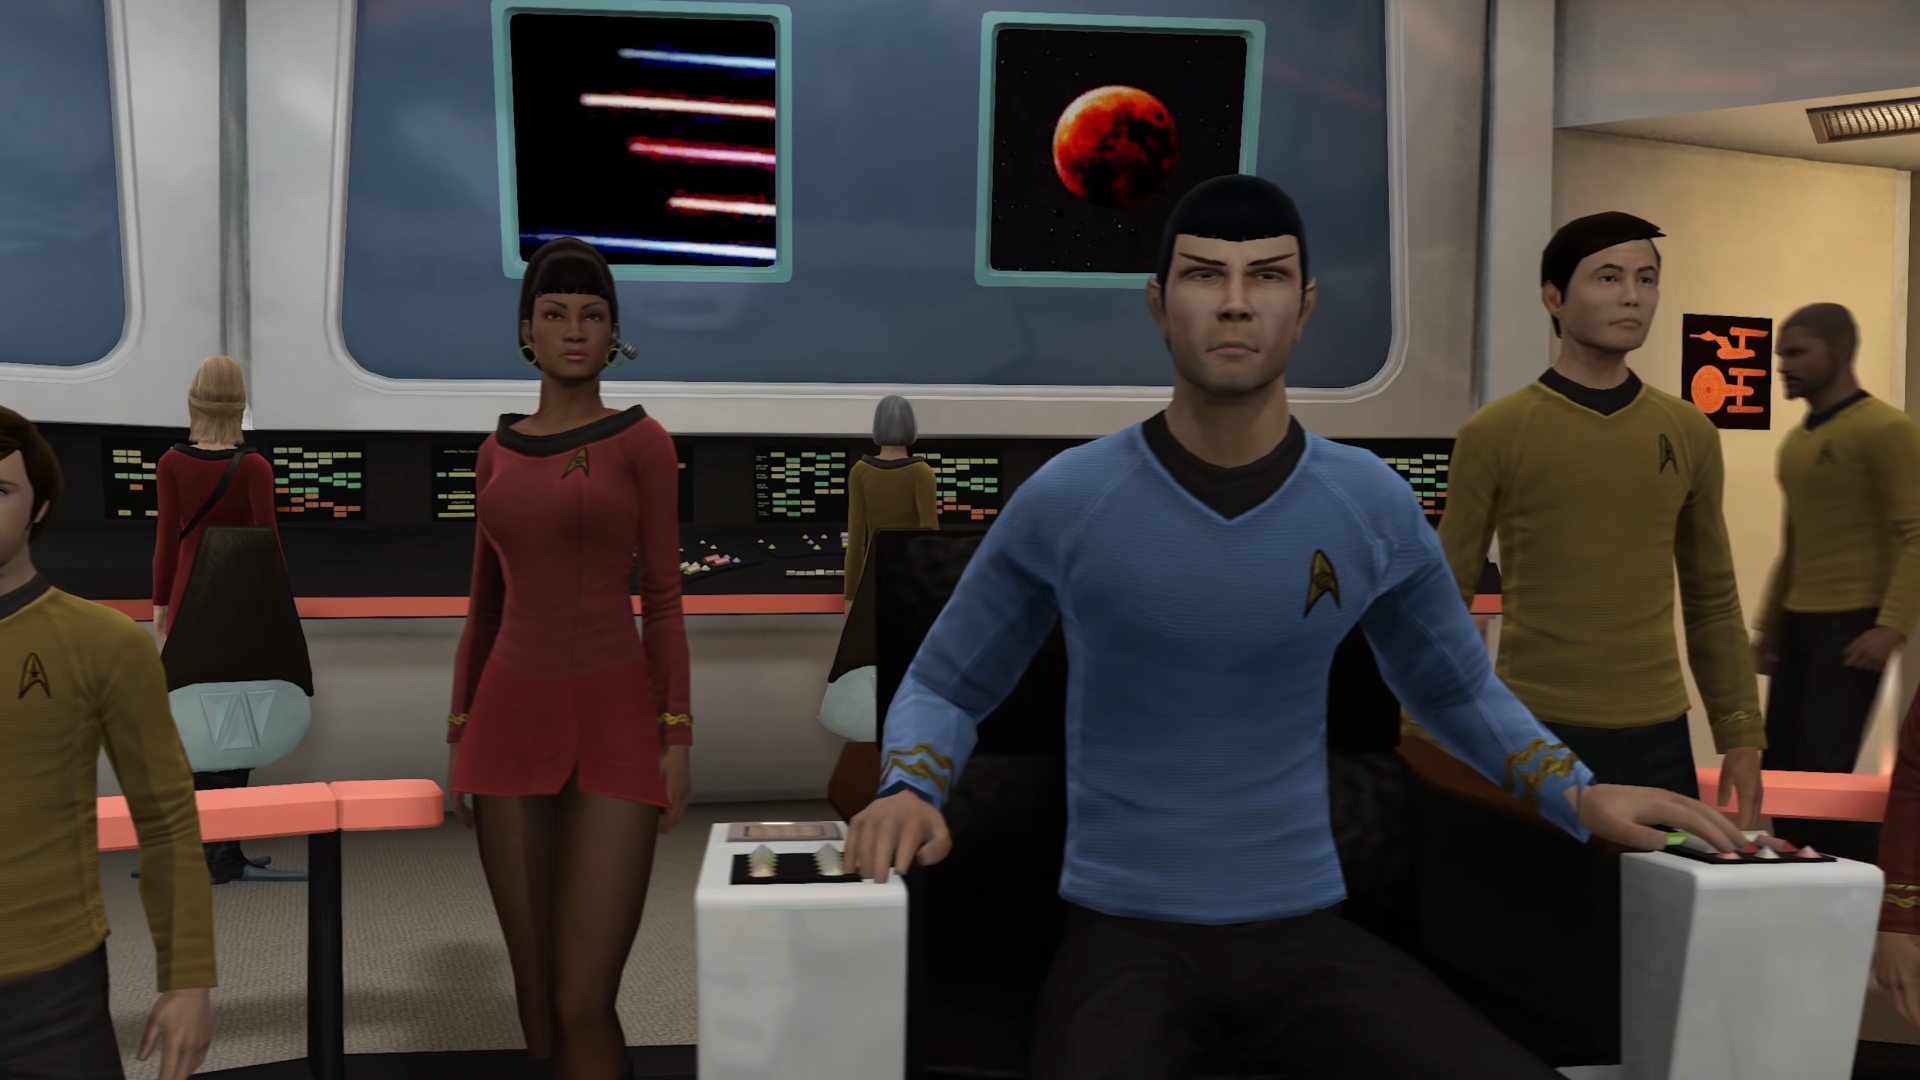 Best free MMOs: The characters of Star Trek Online gather at a desk